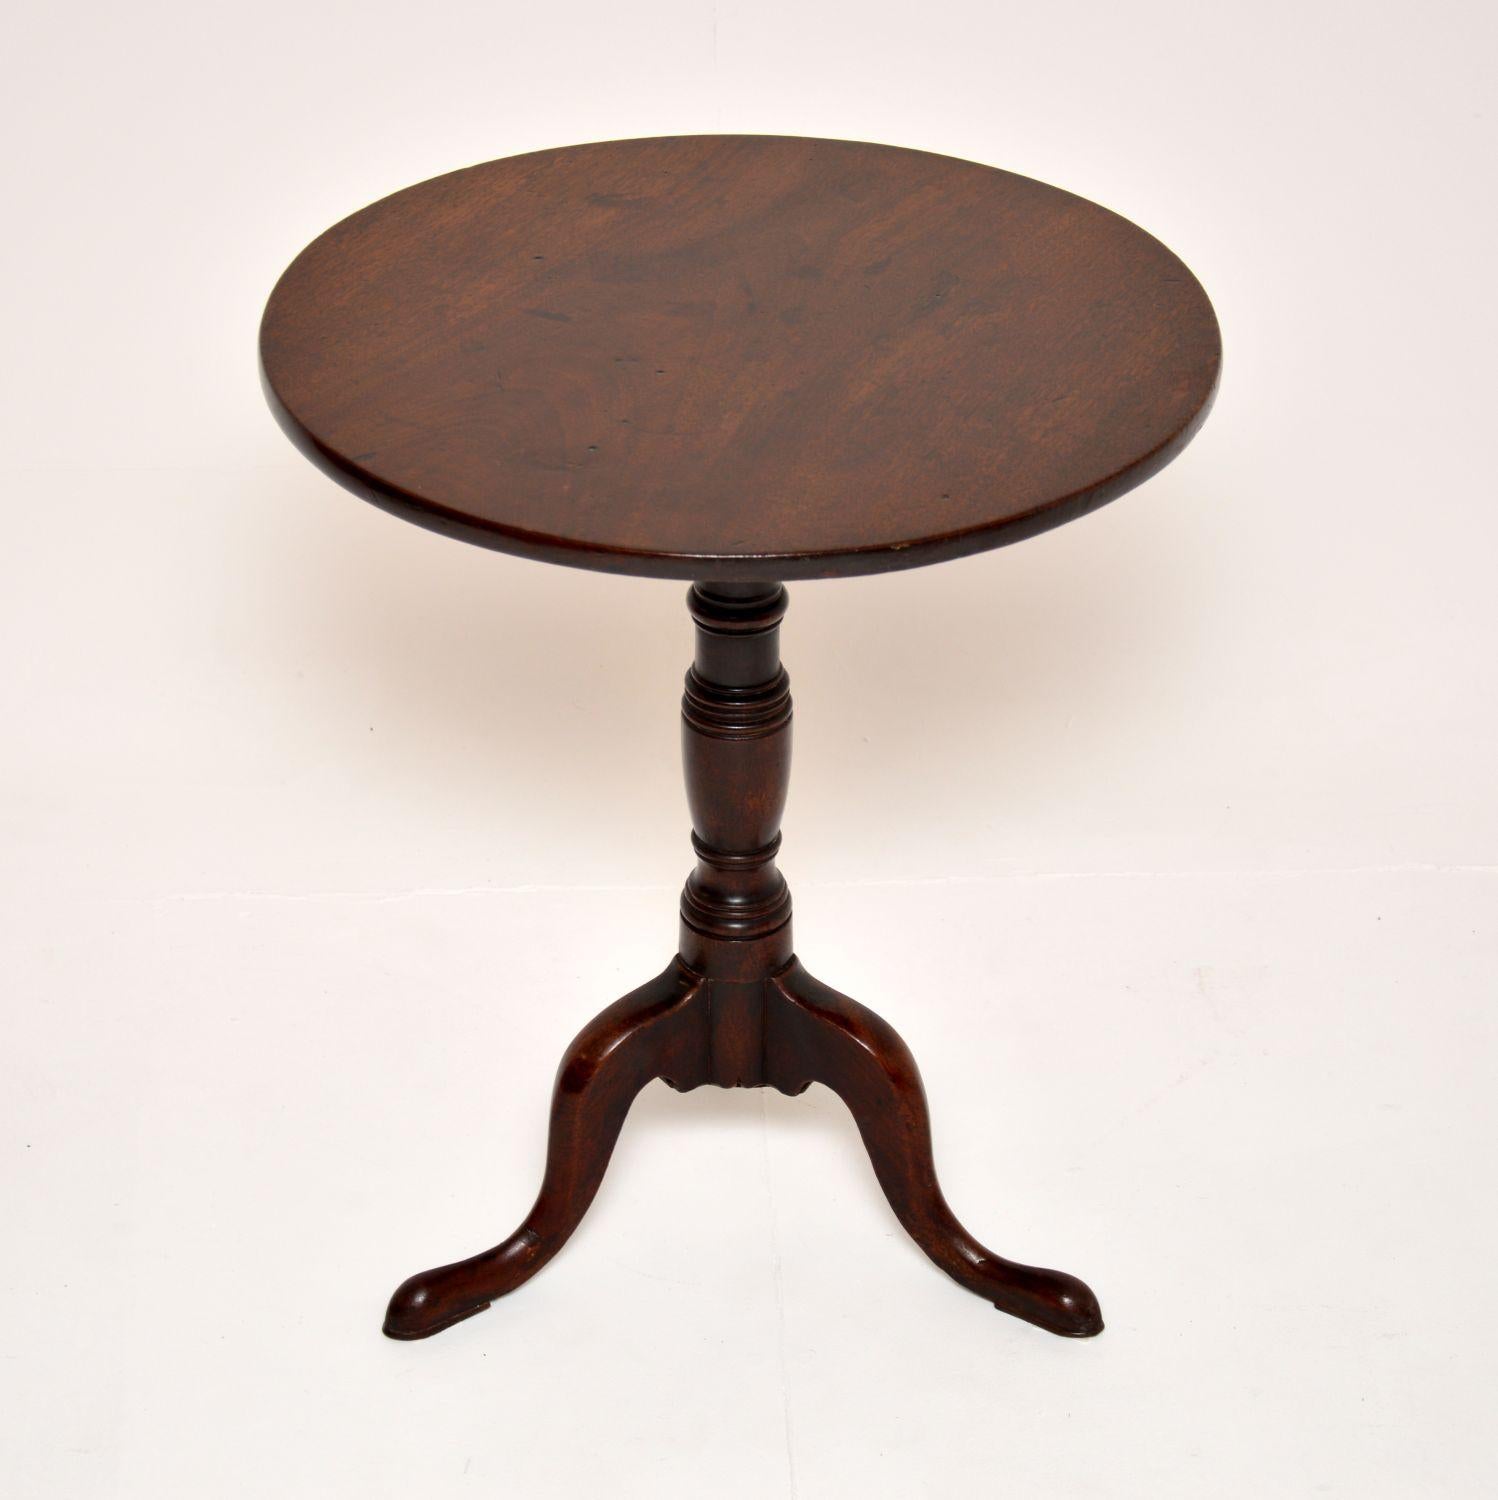 A wonderful original George III period snap top table. This was made in England, it dates from around the 1790-1810 period.

This is of lovely quality and is a useful size. The wood has acquired a gorgeous colour tone and patina, the top can be